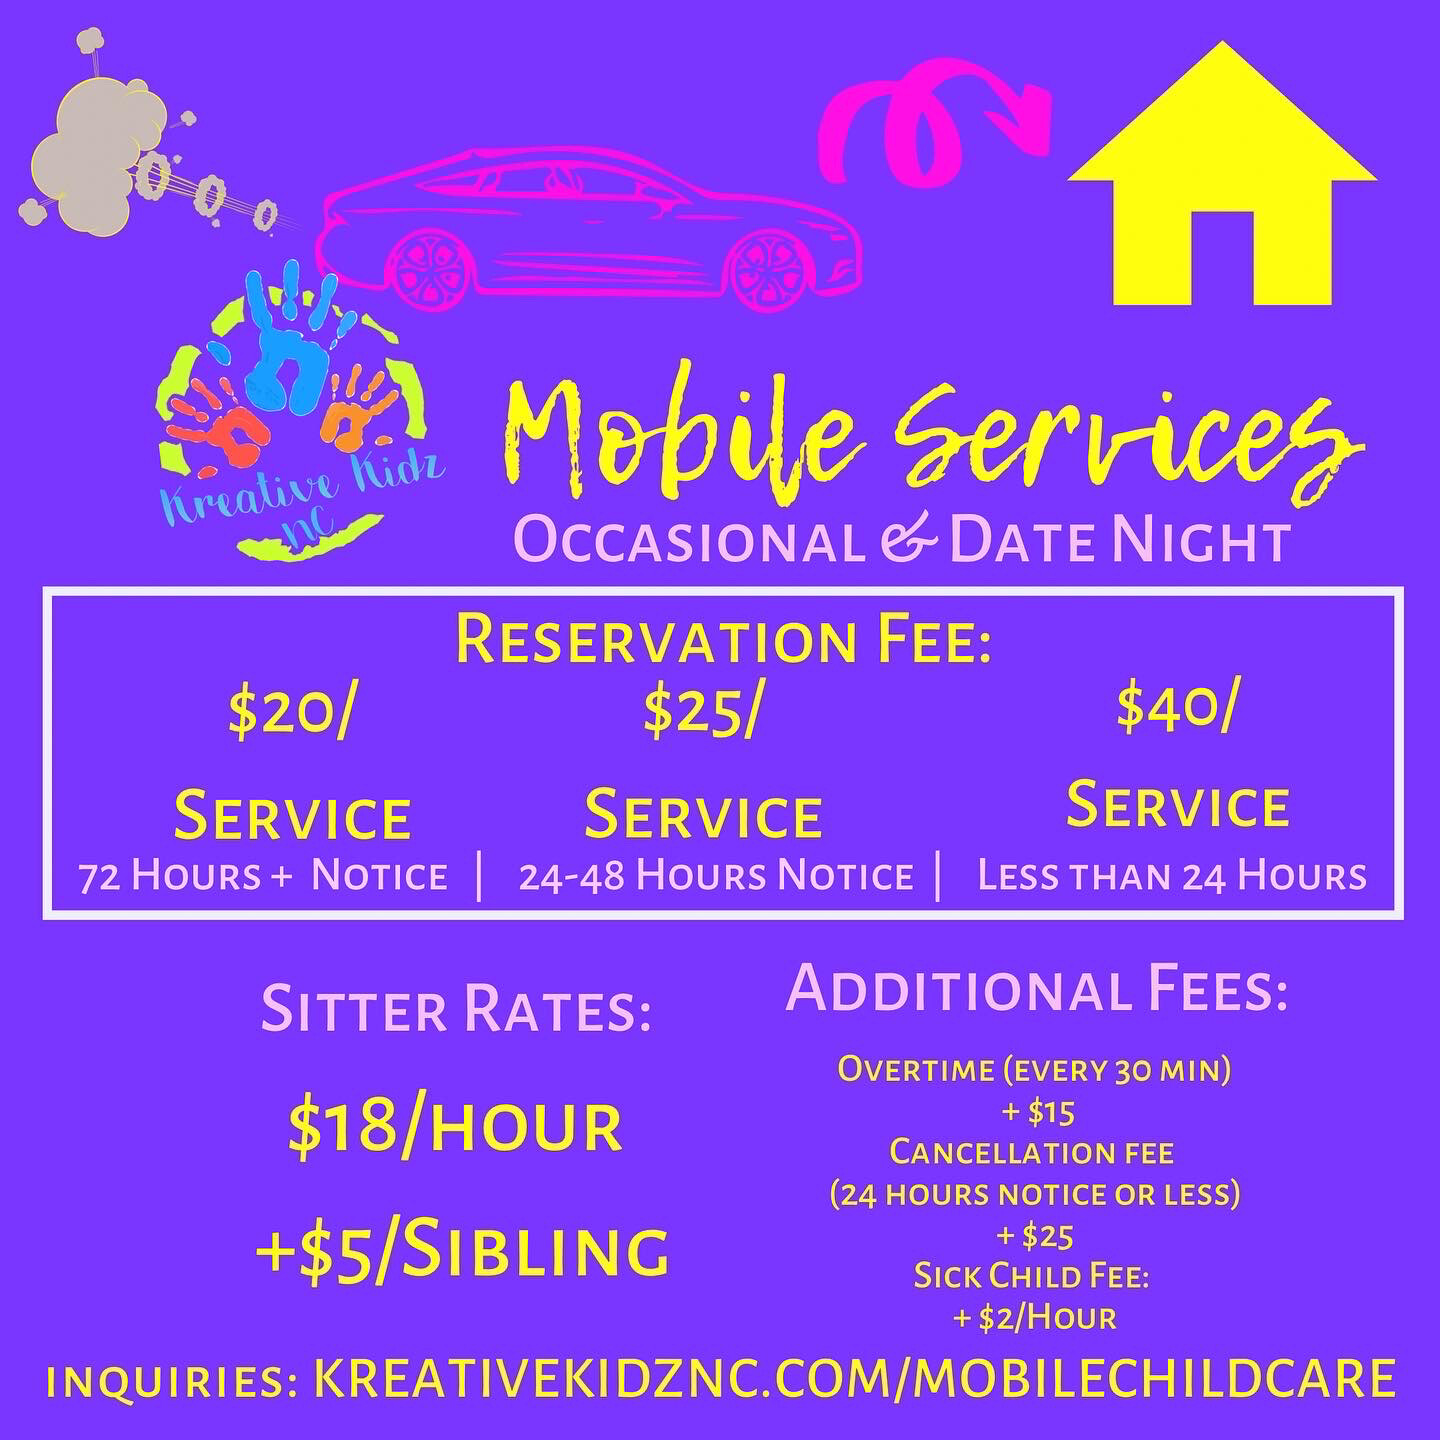 MOBILE RESERVATION FEE (72 HOURS+ ADVANCE NOTICE)